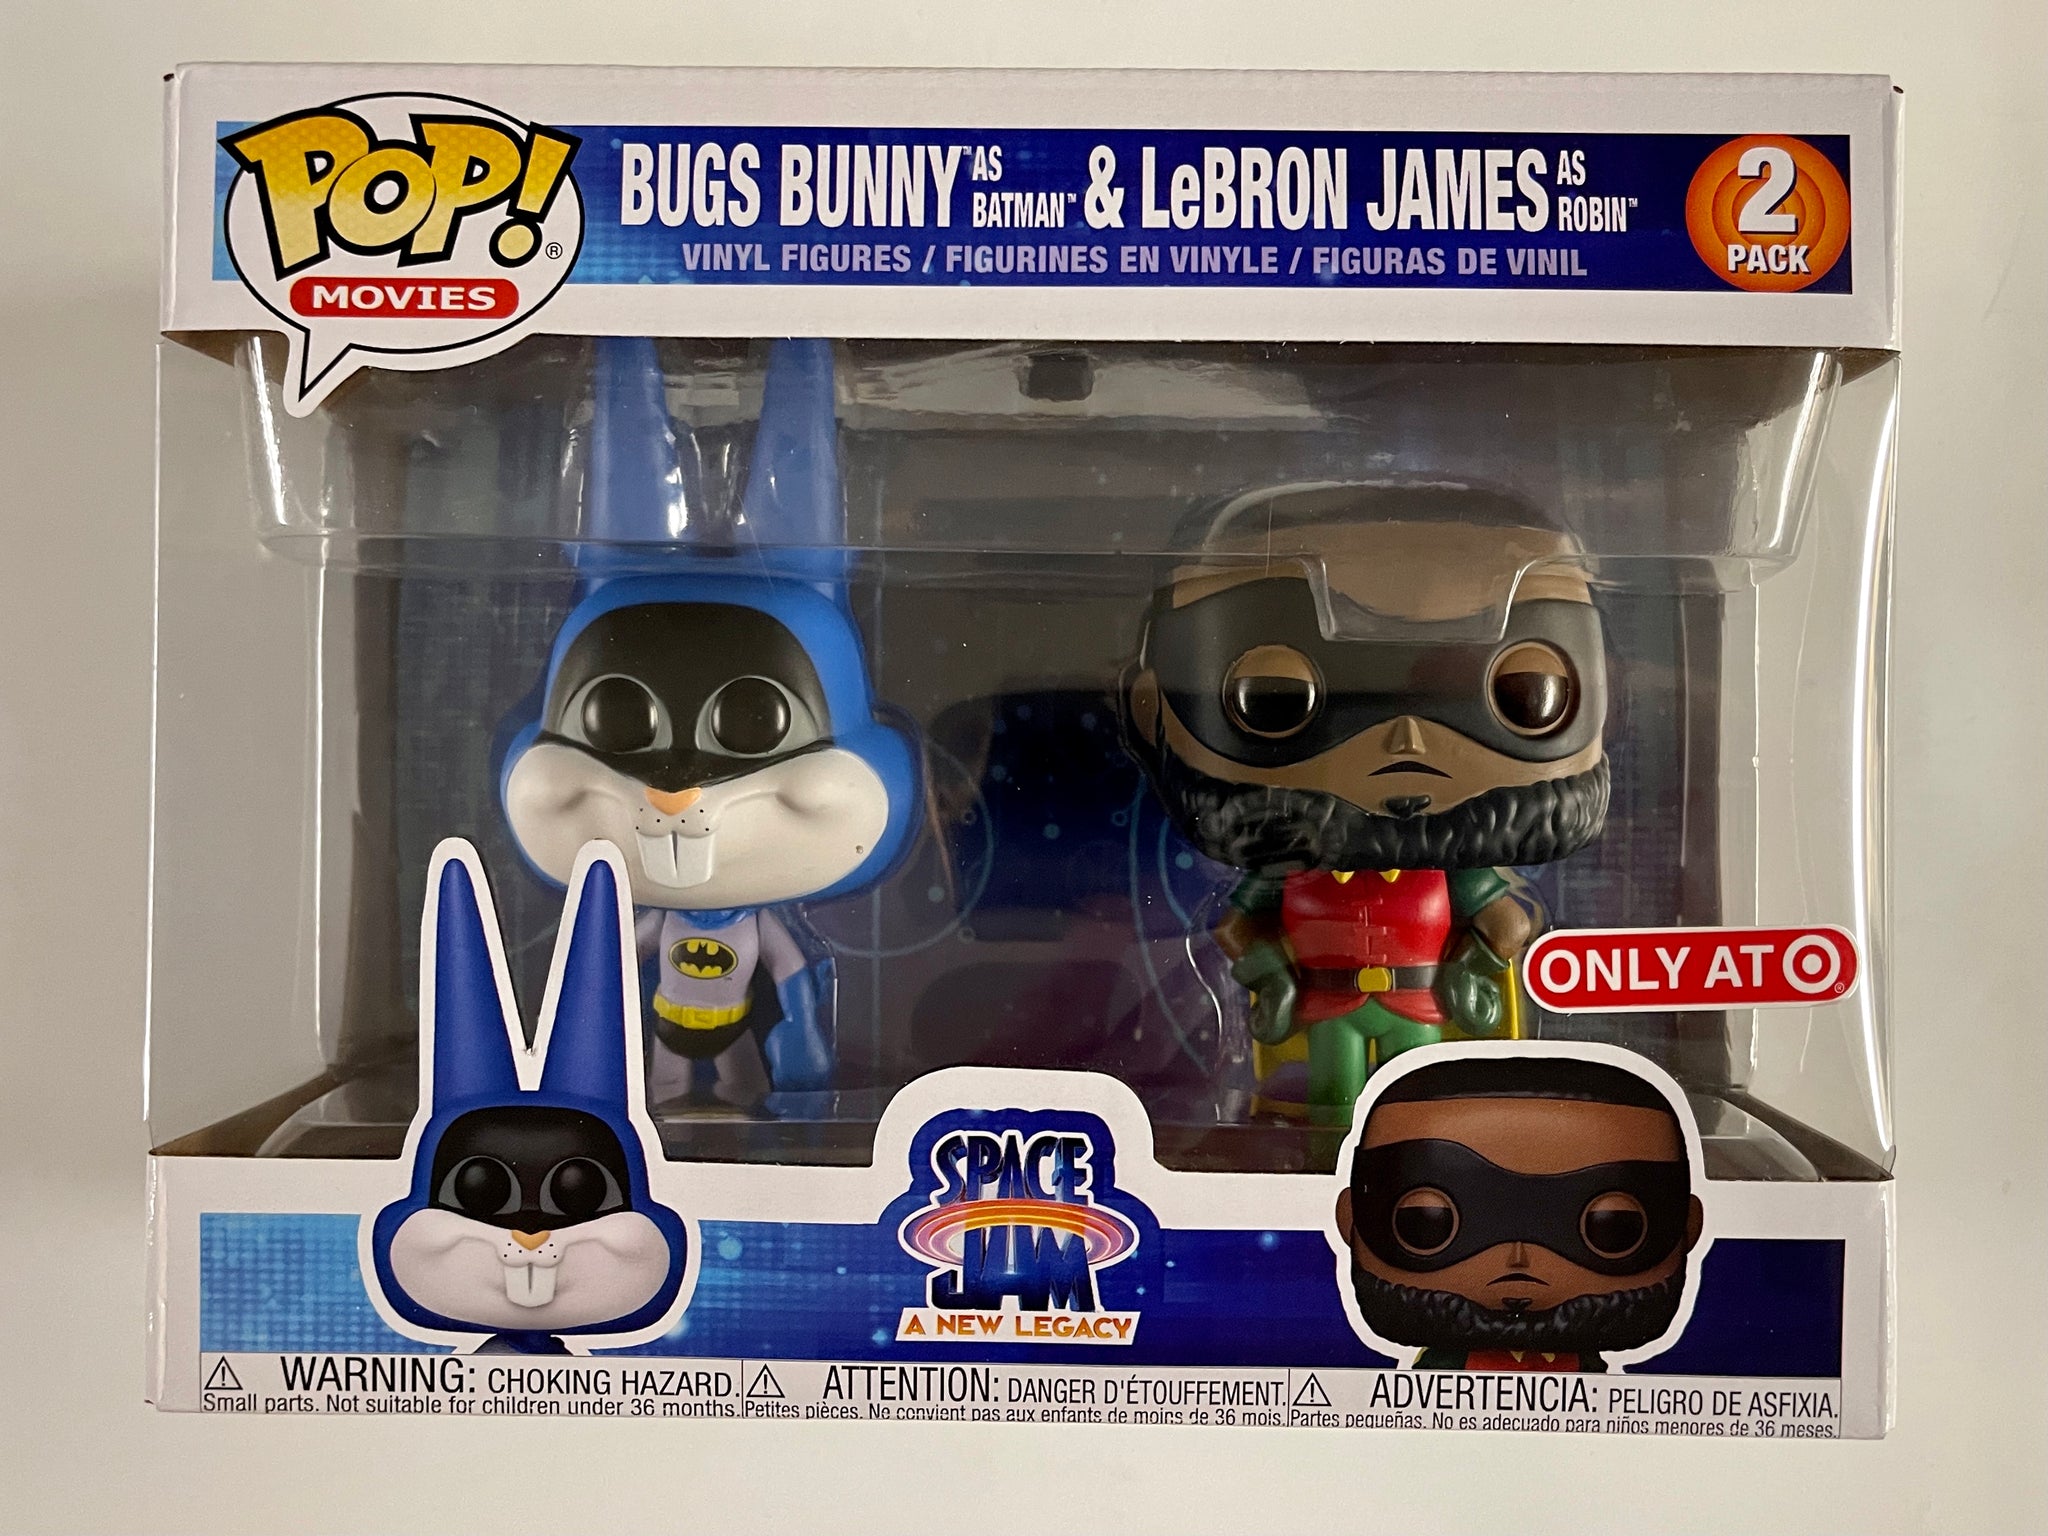 Bugs Bunny & Lebron James Become Batman & Robin In New Space Jam 2 